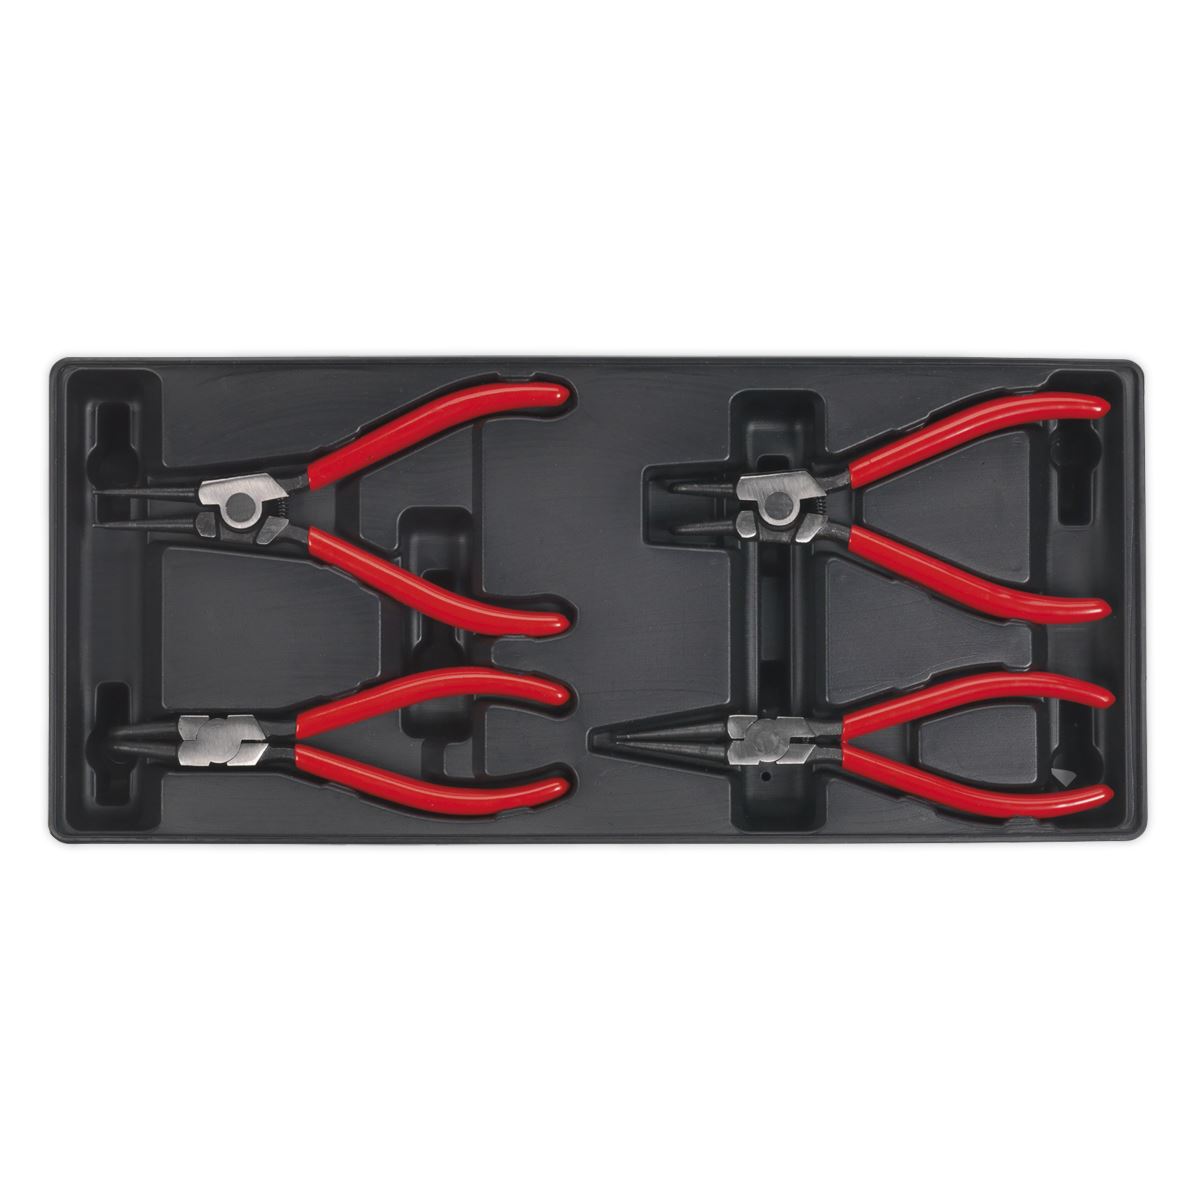 Sealey Premier Tool Tray with Circlip Pliers Set 4pc